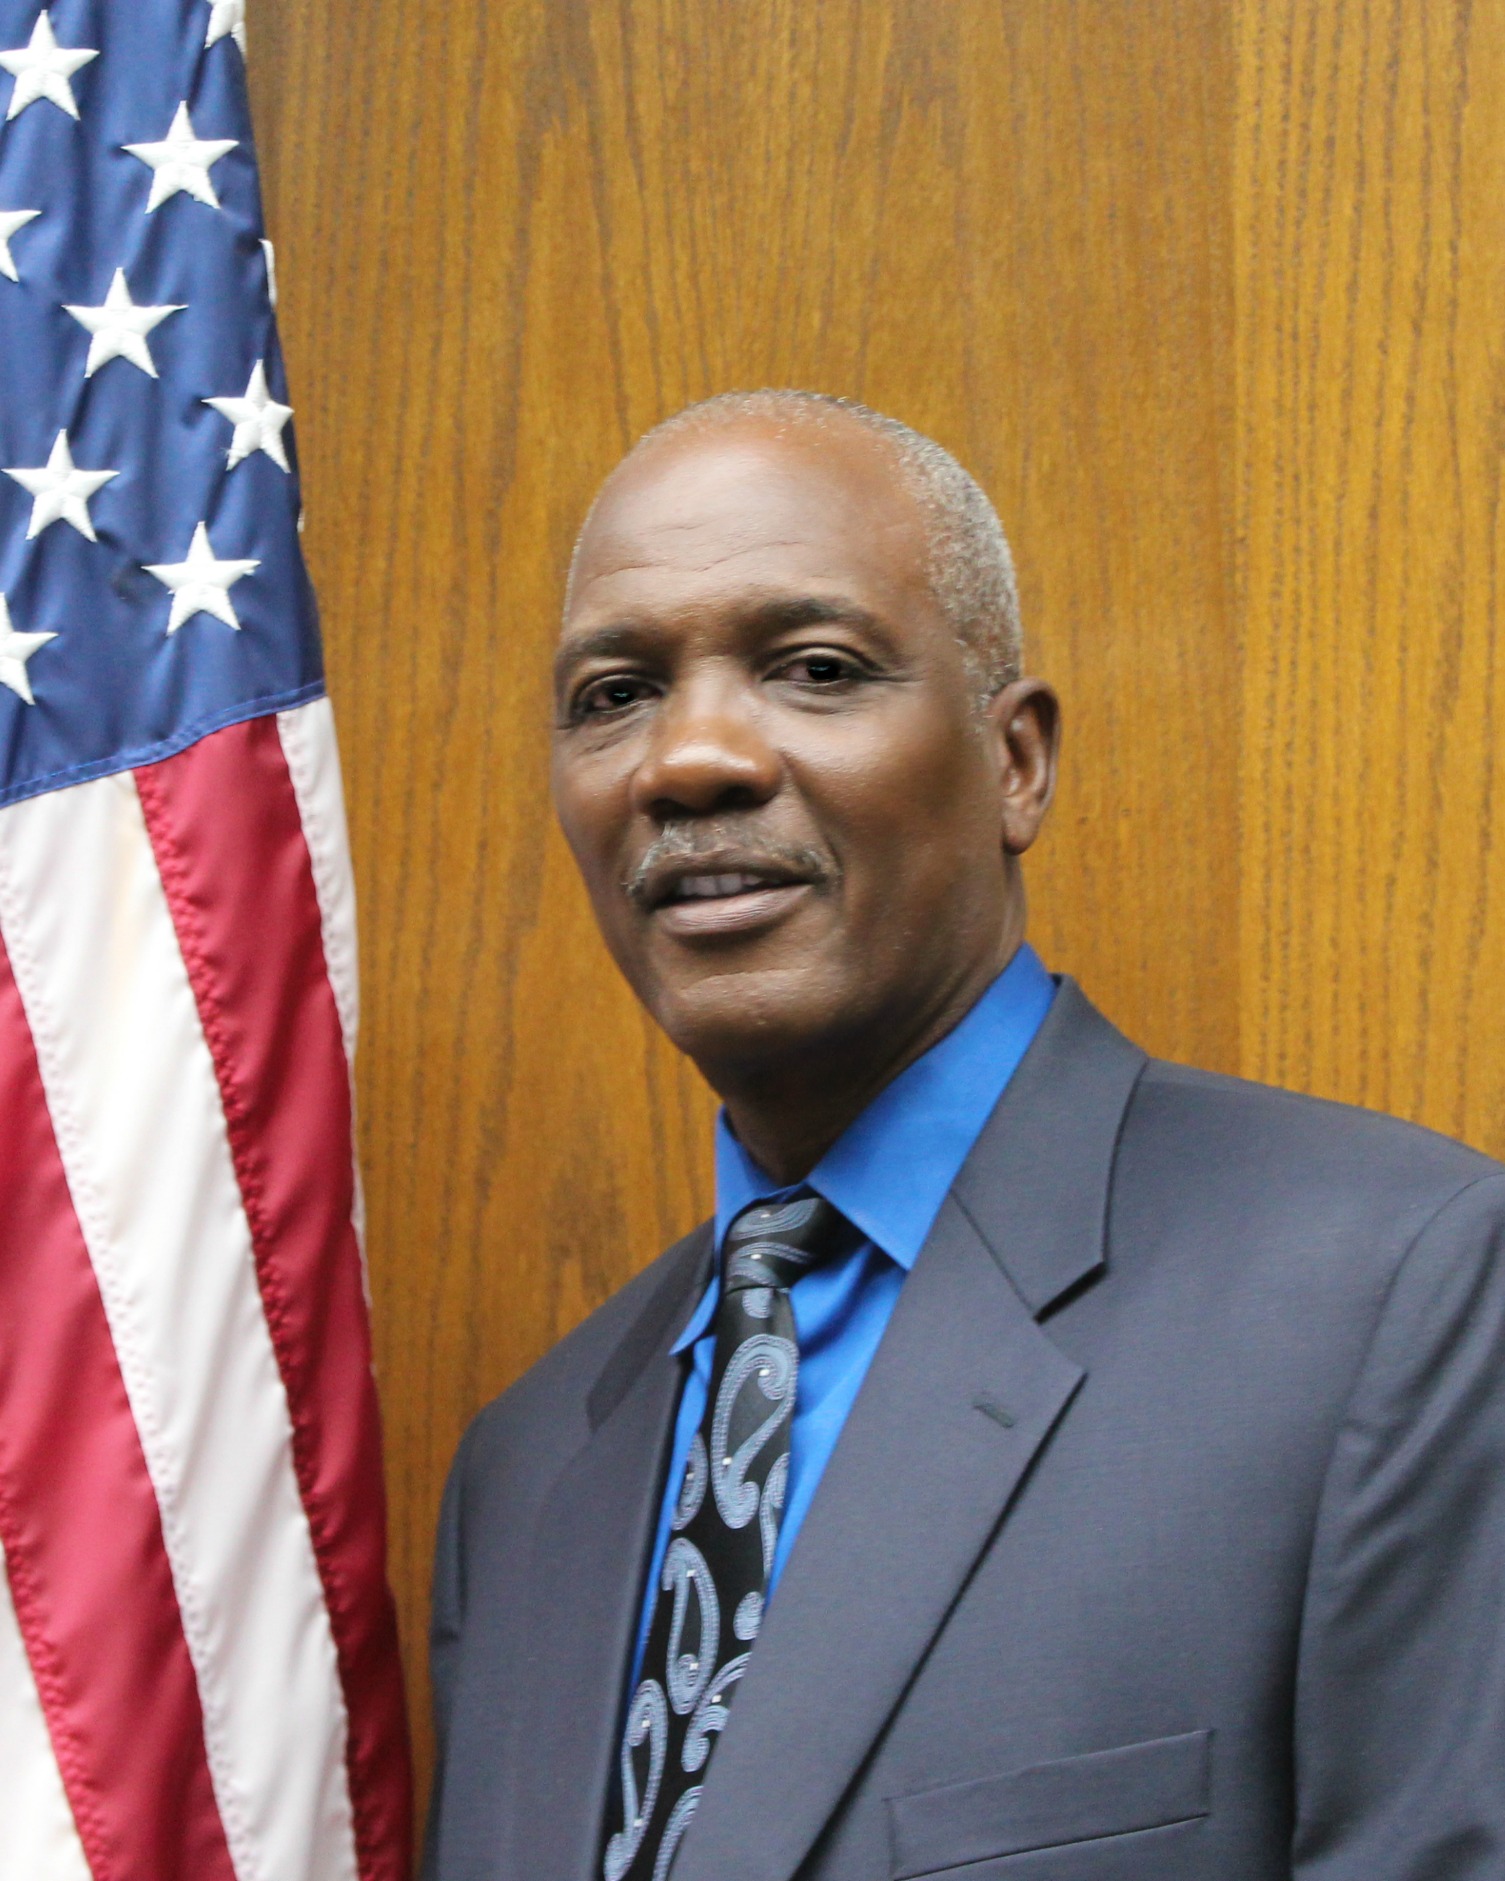 County Council Member Gerald Dawson to Hold Two District Meetings in October